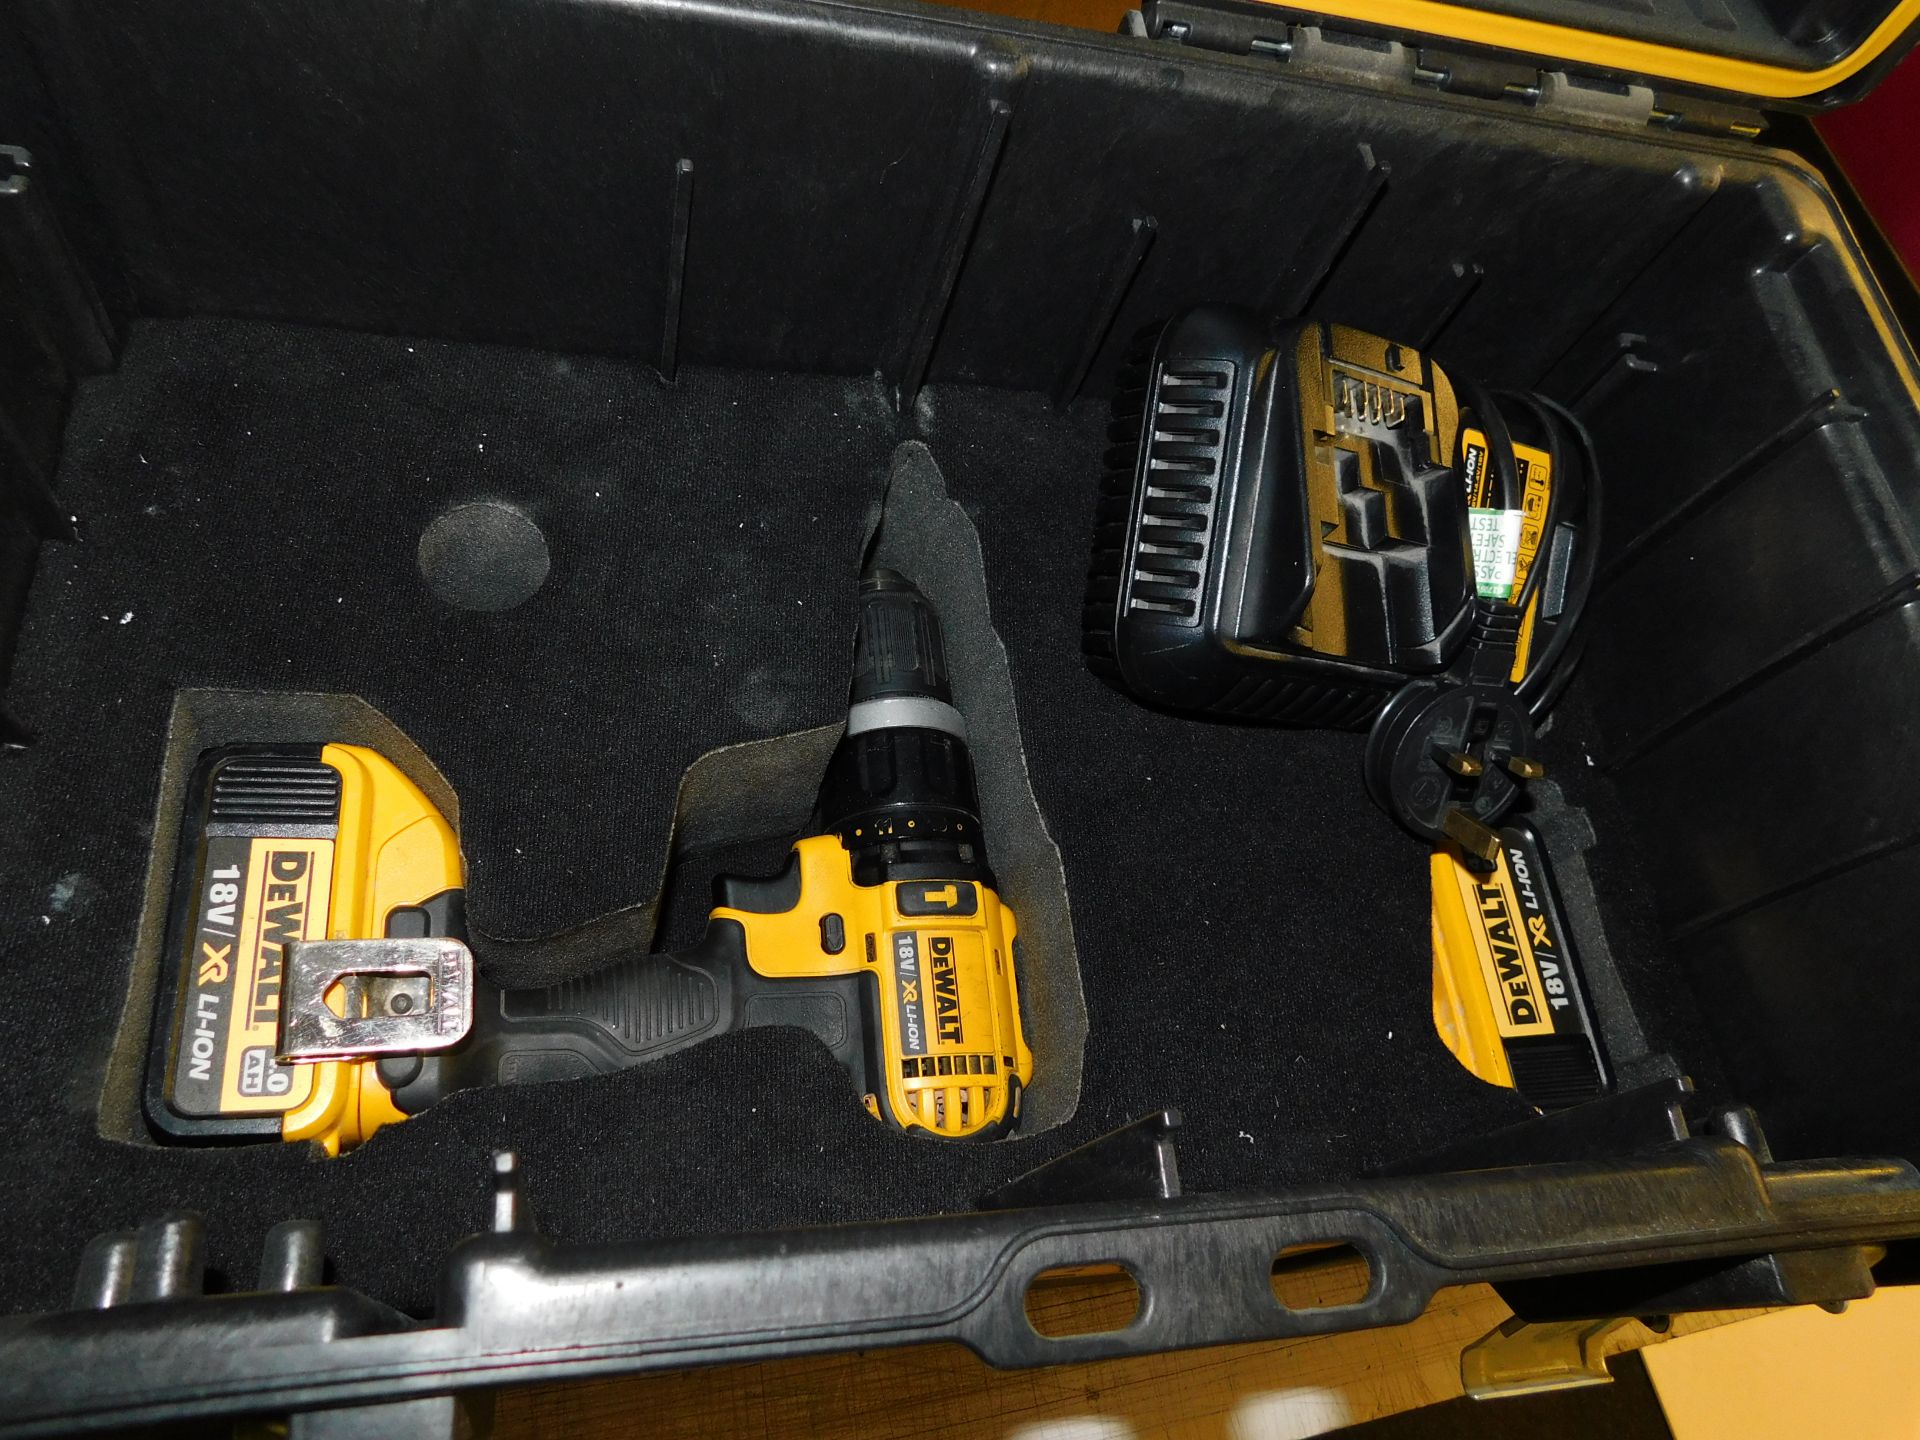 DeWalt 18v Cordless Drill, 2 Batteries, Charger & Carry Case (on mezzanine) (Location Rochdale.